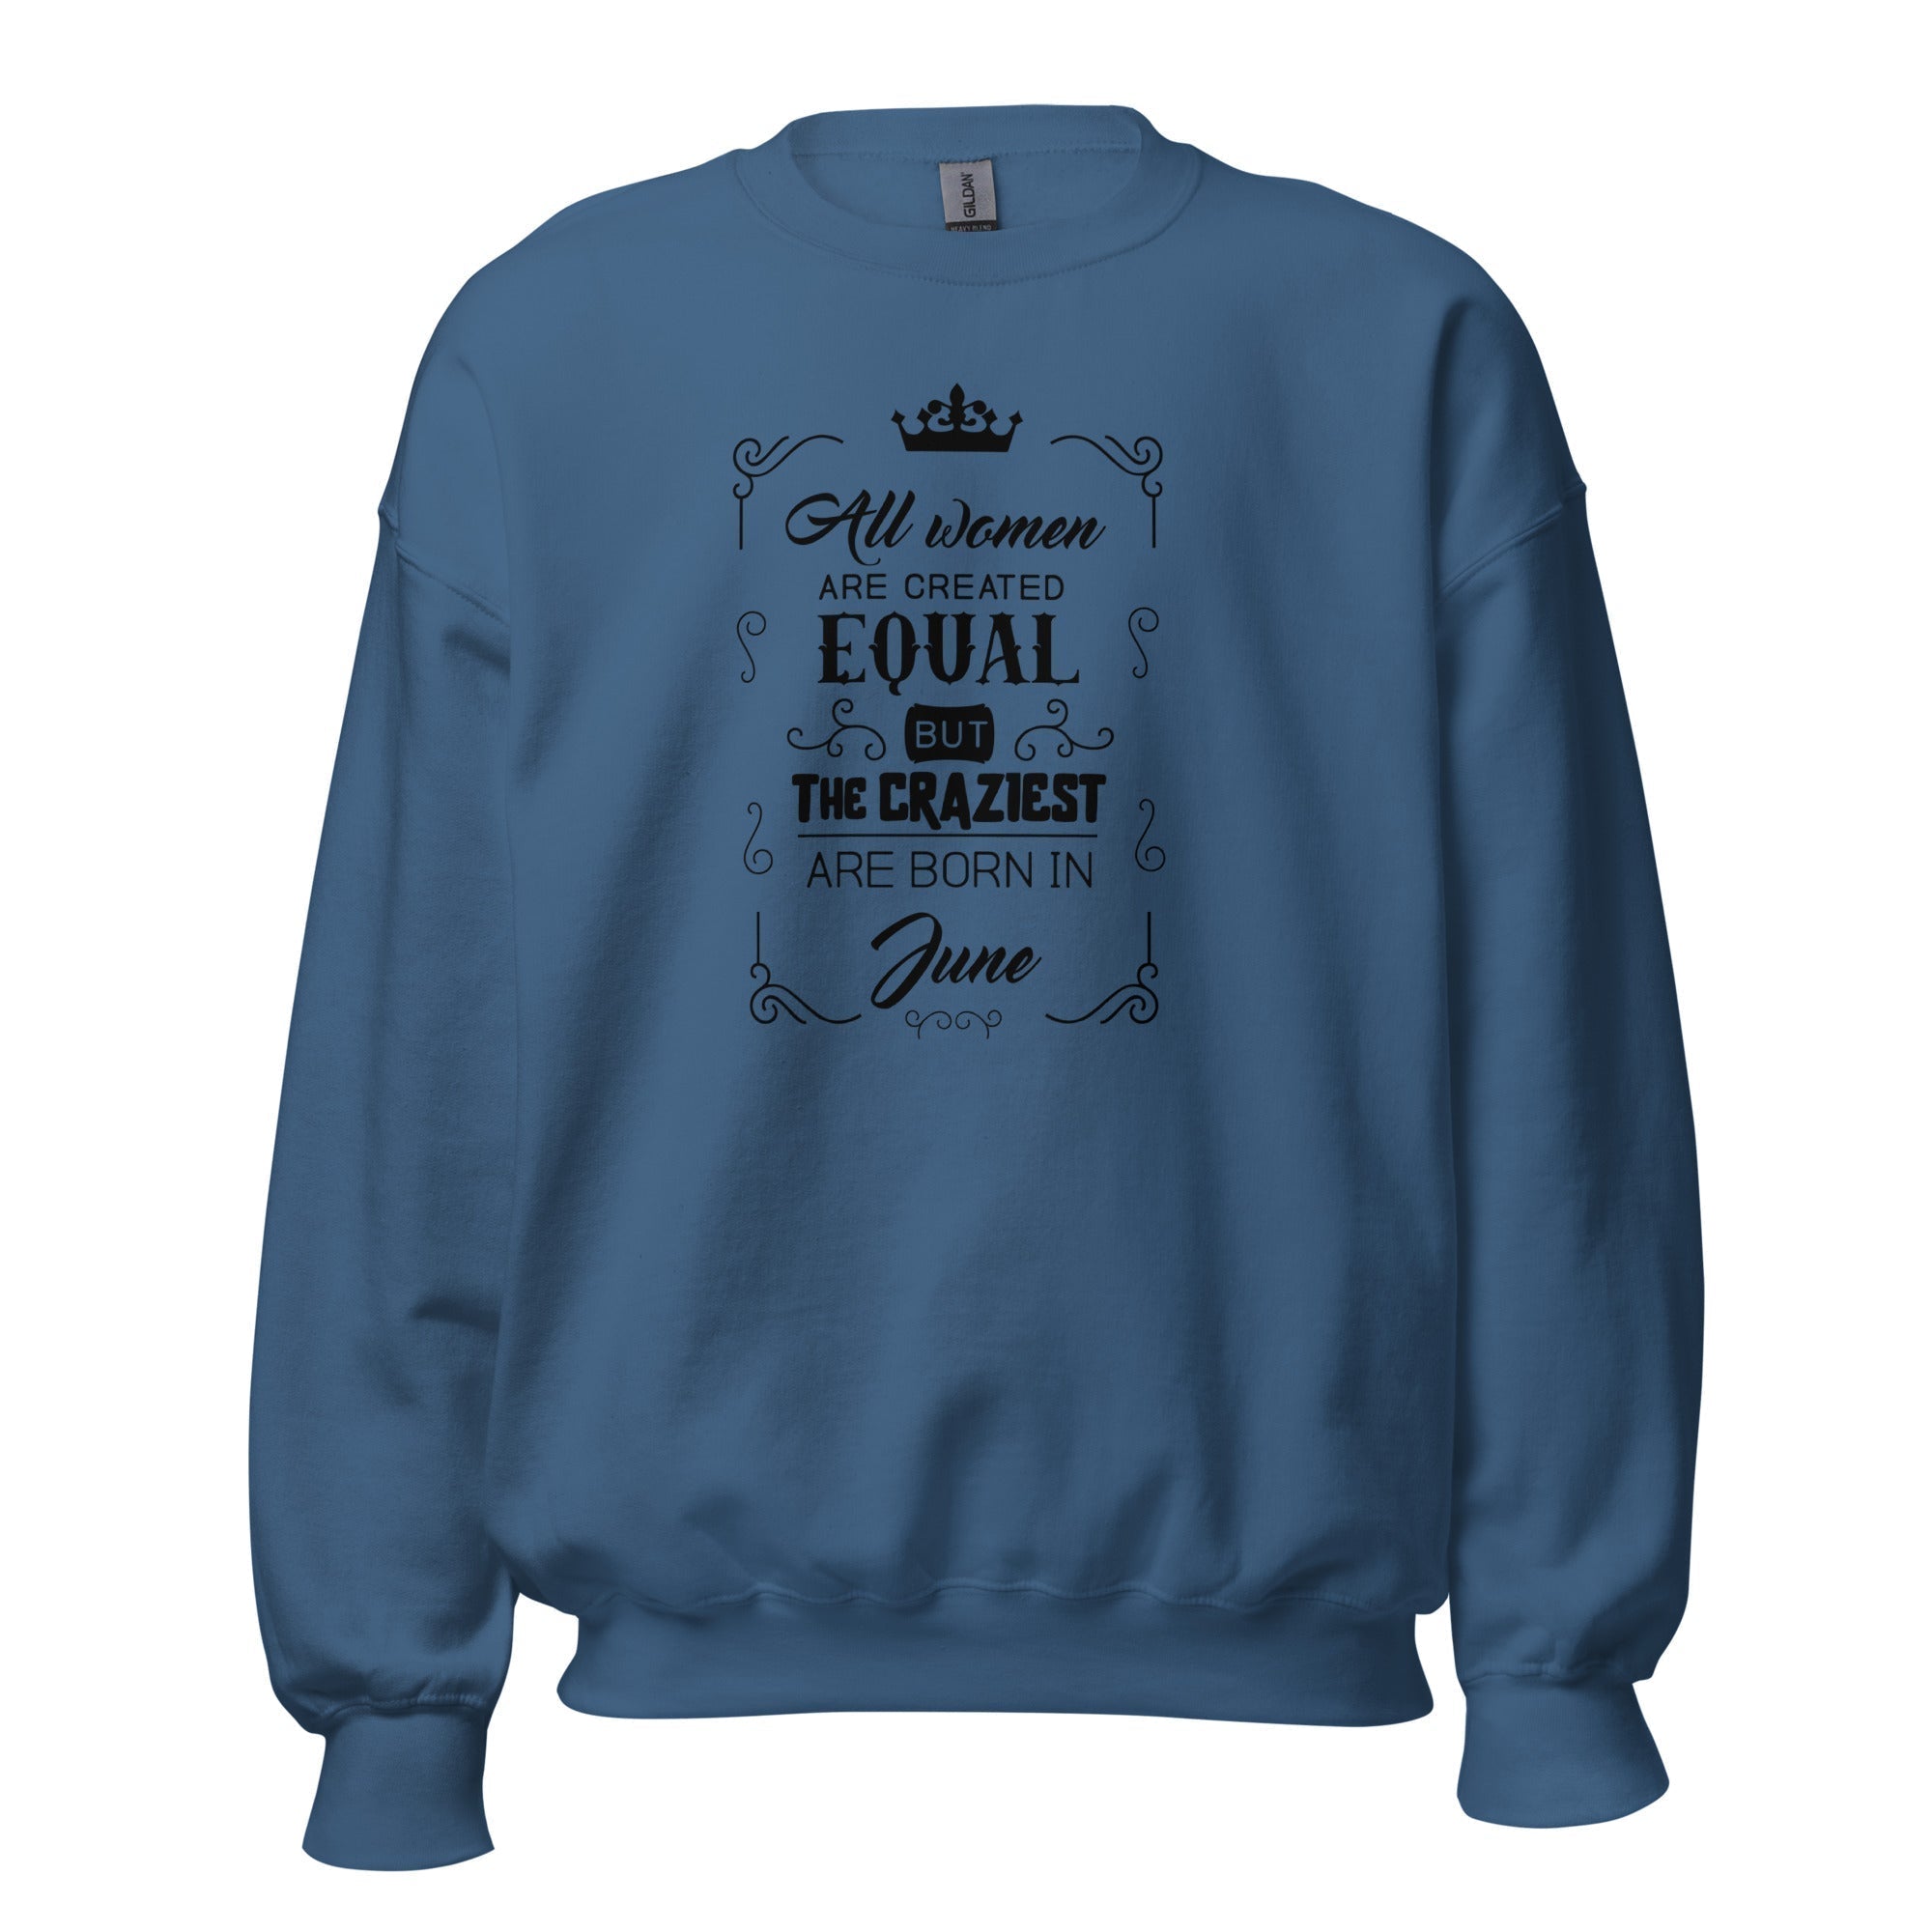 Women's Crew Neck Sweatshirt - All Women Are Created Equal But The Craziest Are Born In June - GRAPHIC T-SHIRTS